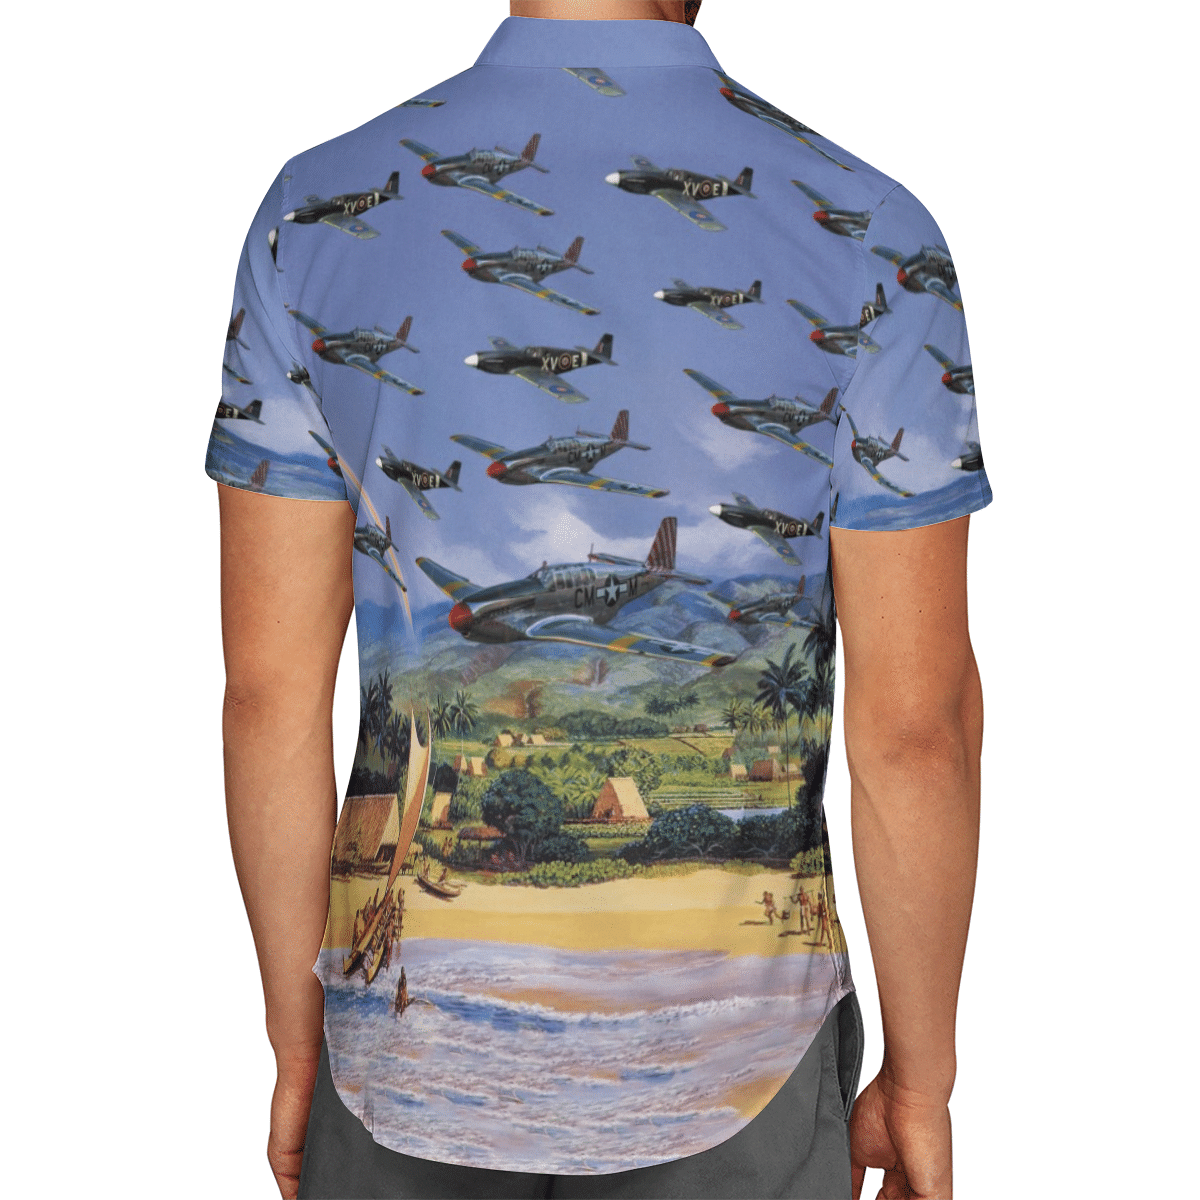 Going to the beach with a quality shirt 201